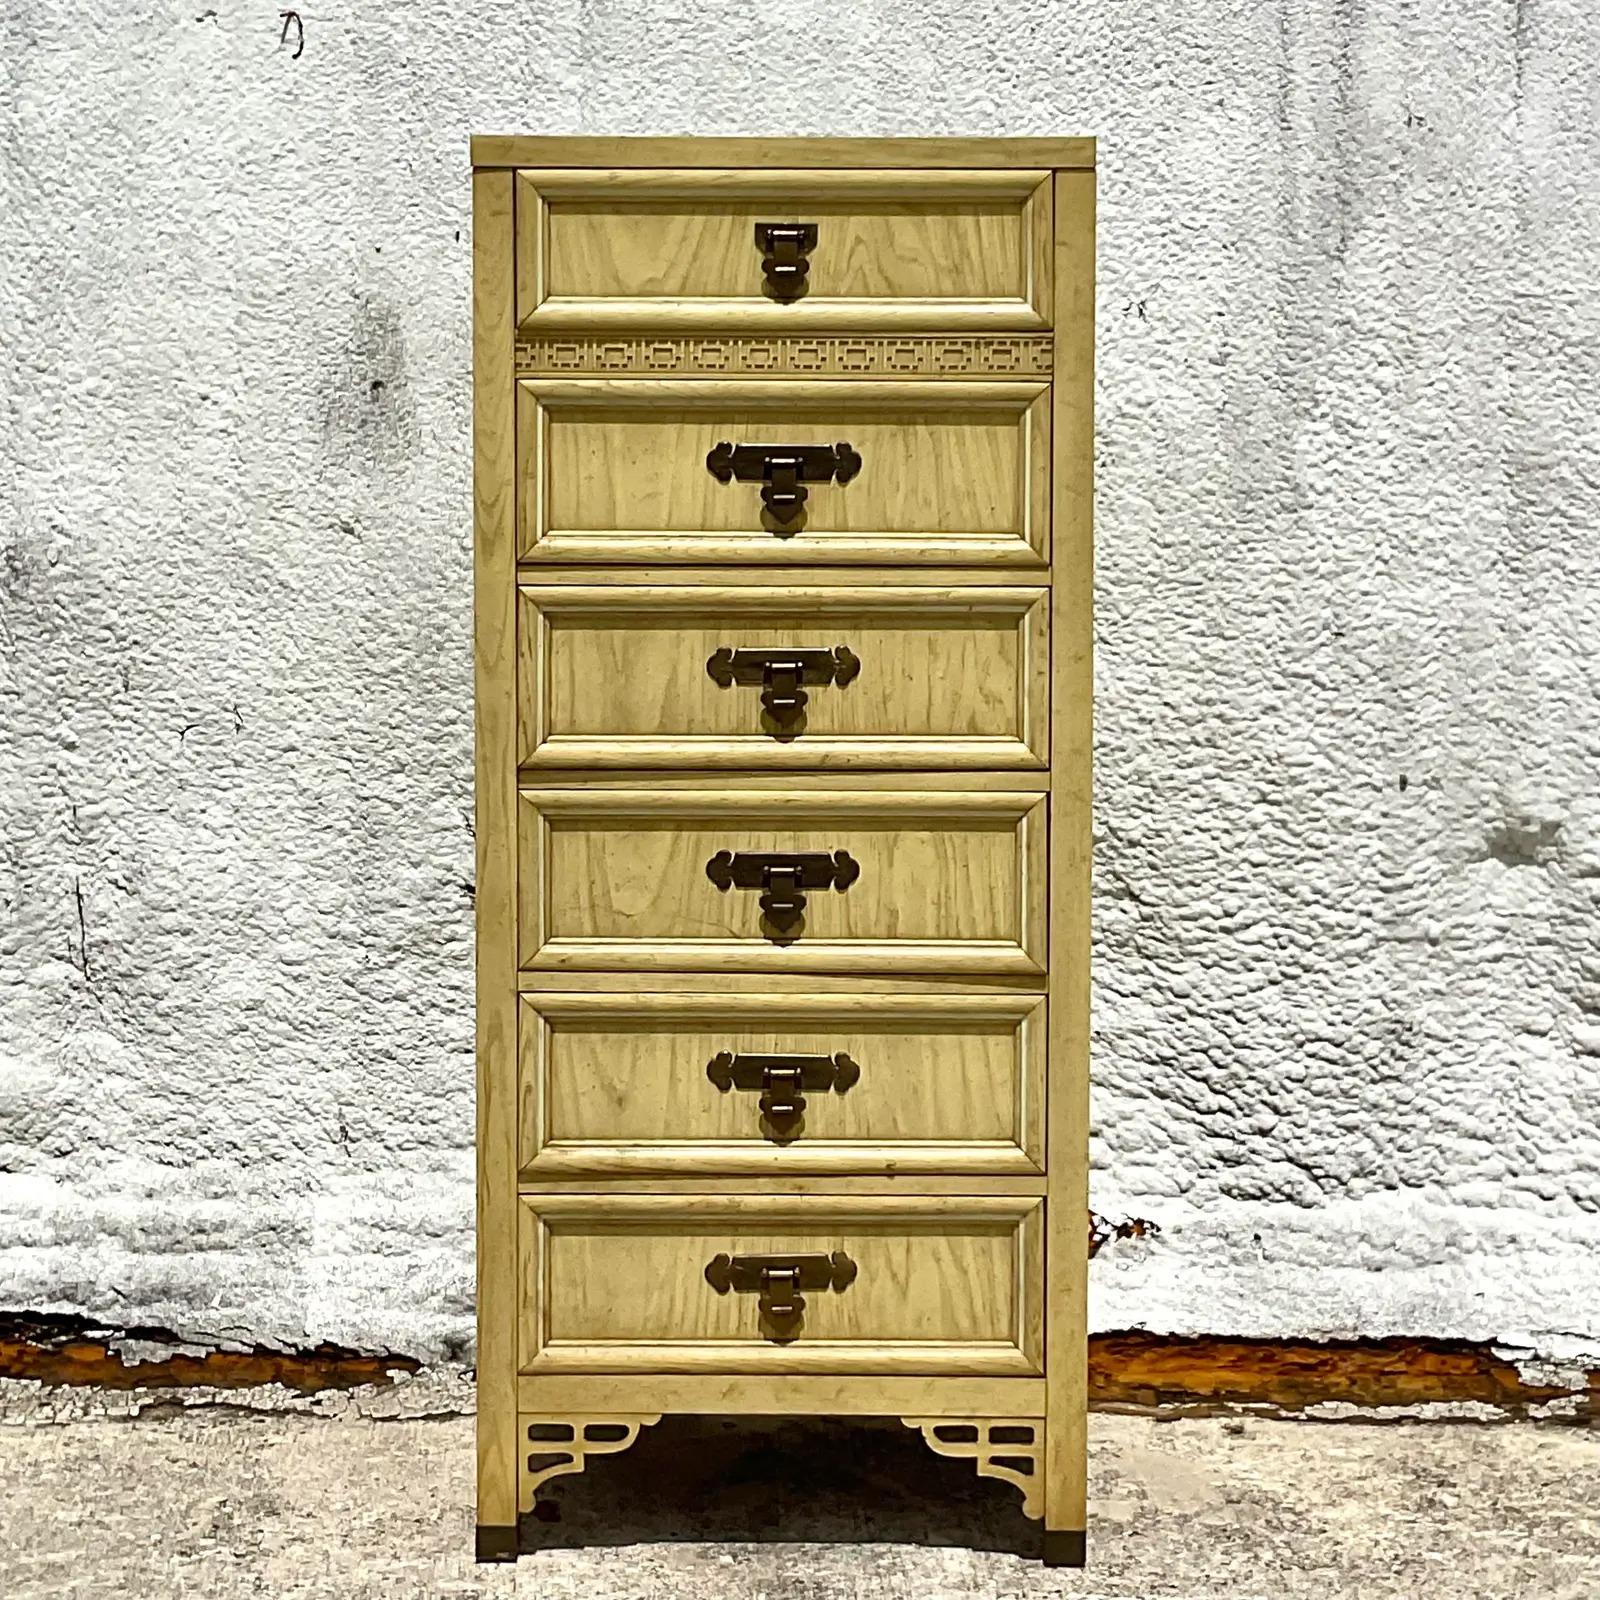 Fantastic vintage Regency chest of drawers. The coveted Dixie Shanghai-la design with heavy Asian brass hardware and fretwork trim. Marked on the inside. Acquired from a Palm Beach estate